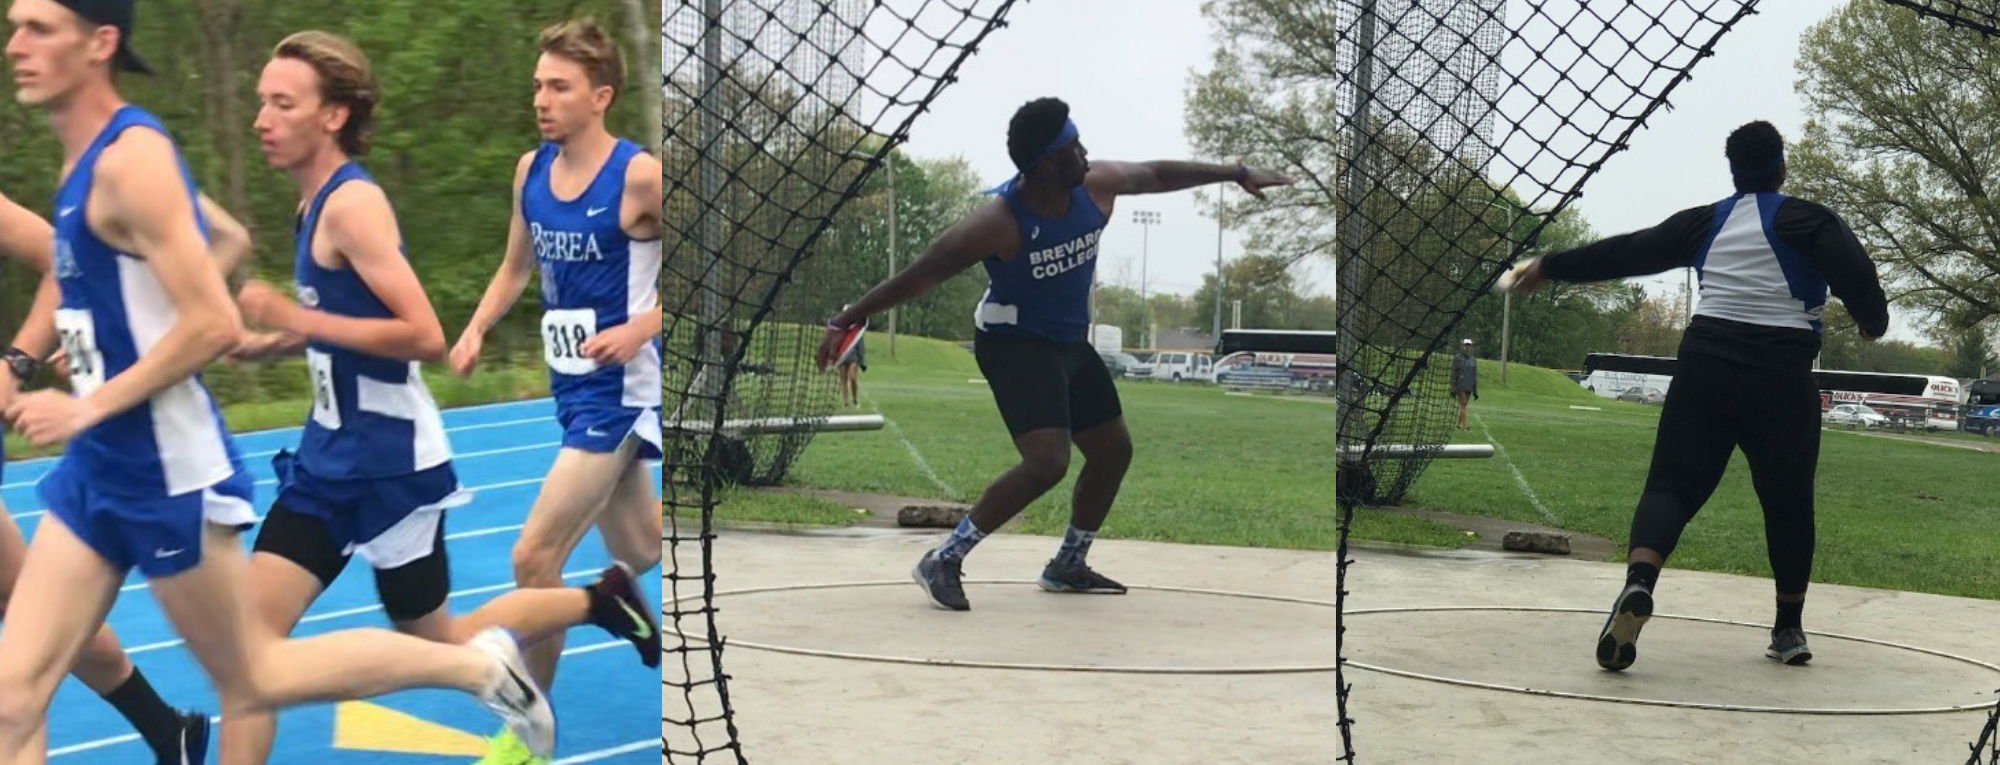 Big Results for Brevard at the USA South Conference Track & Field Championships